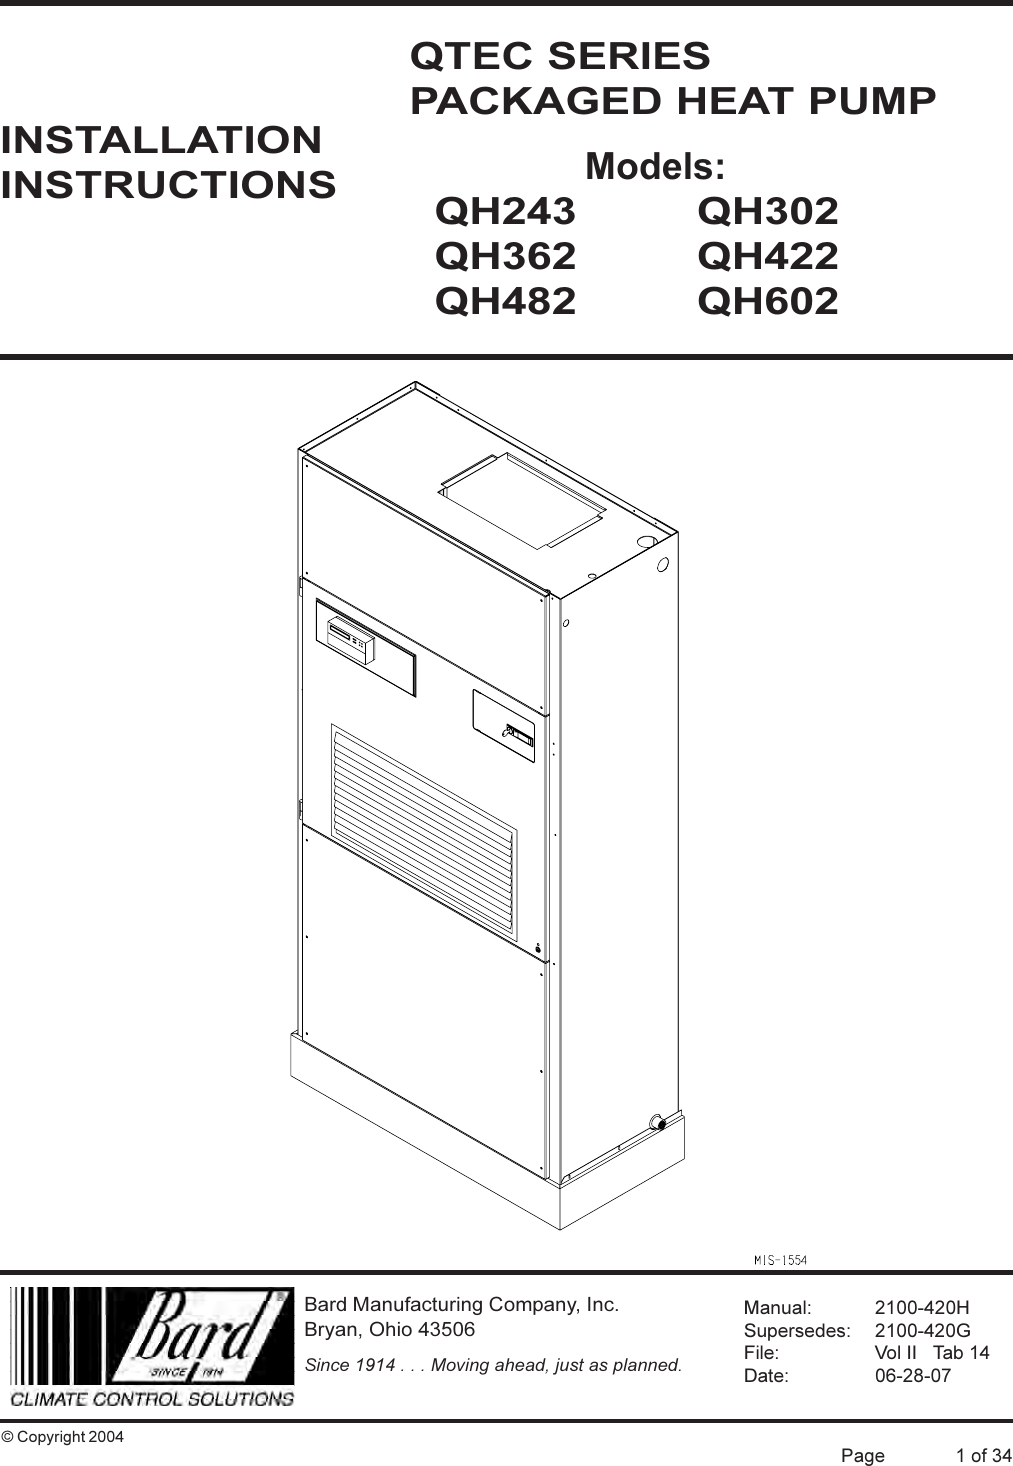 Bard Qh422 2100 420 H 2007 06 User Manual To The A56c4dc0